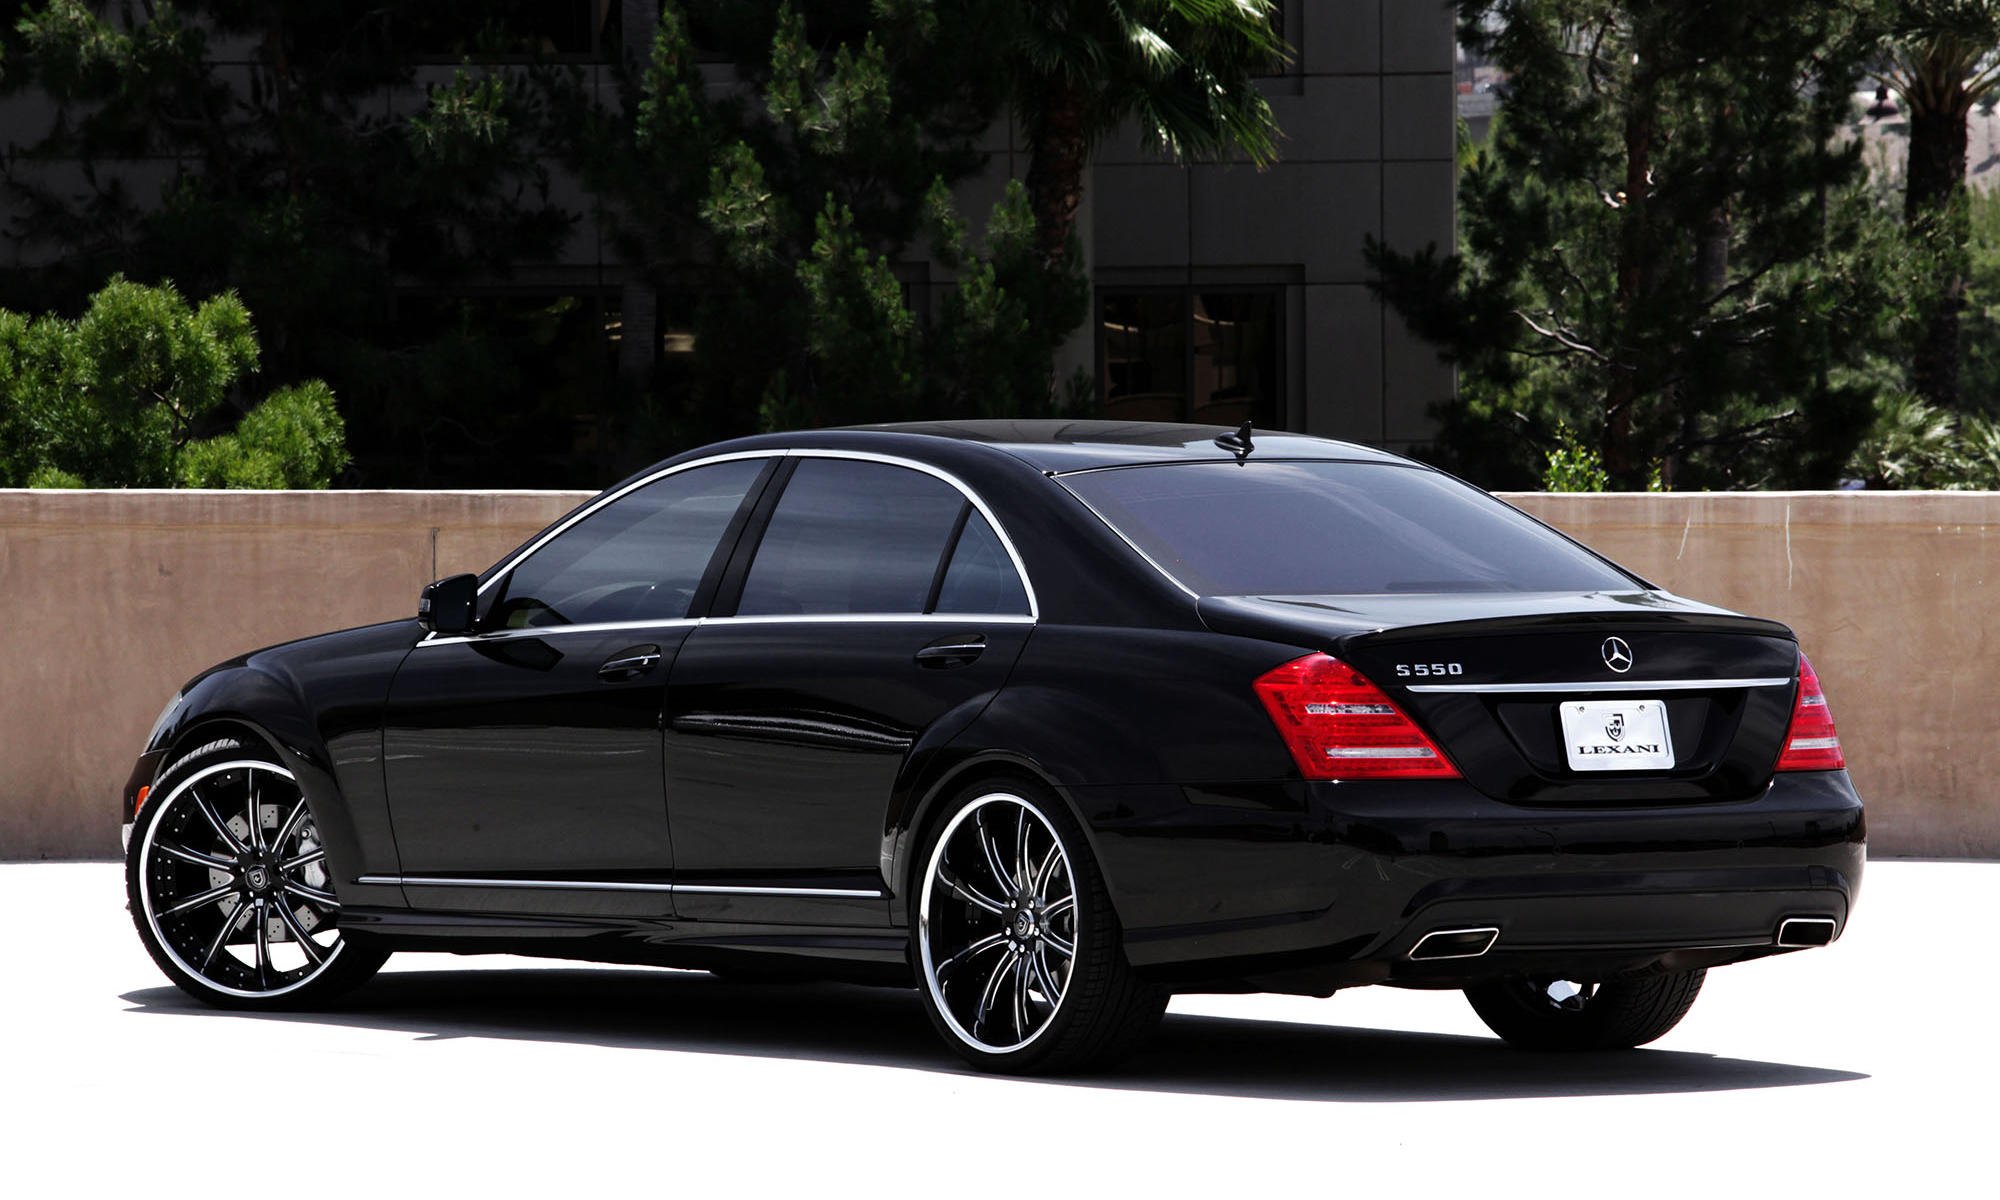 Rear Diffuser with Single Exhaust Tips on Mercedes S-Class - Photo by Lexani